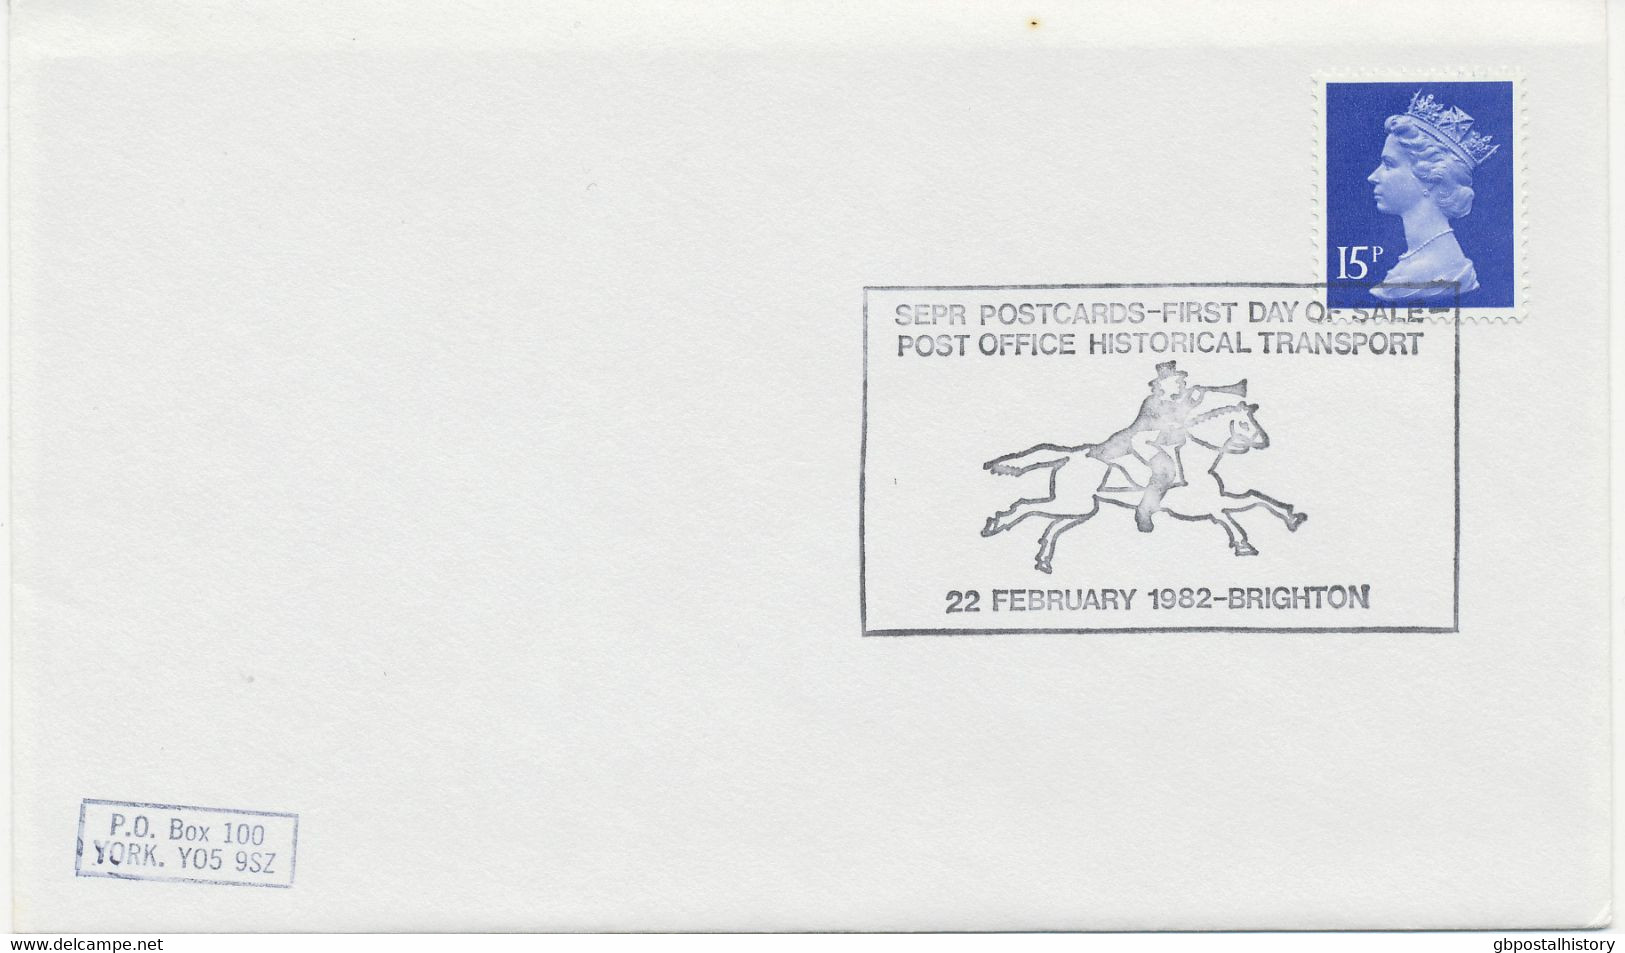 GB SPECIAL EVENT POSTMARK SEPR Postcards - First Day Of Sale - Post Office Historical Transport - 22 February 1982 - BRI - Kutschen